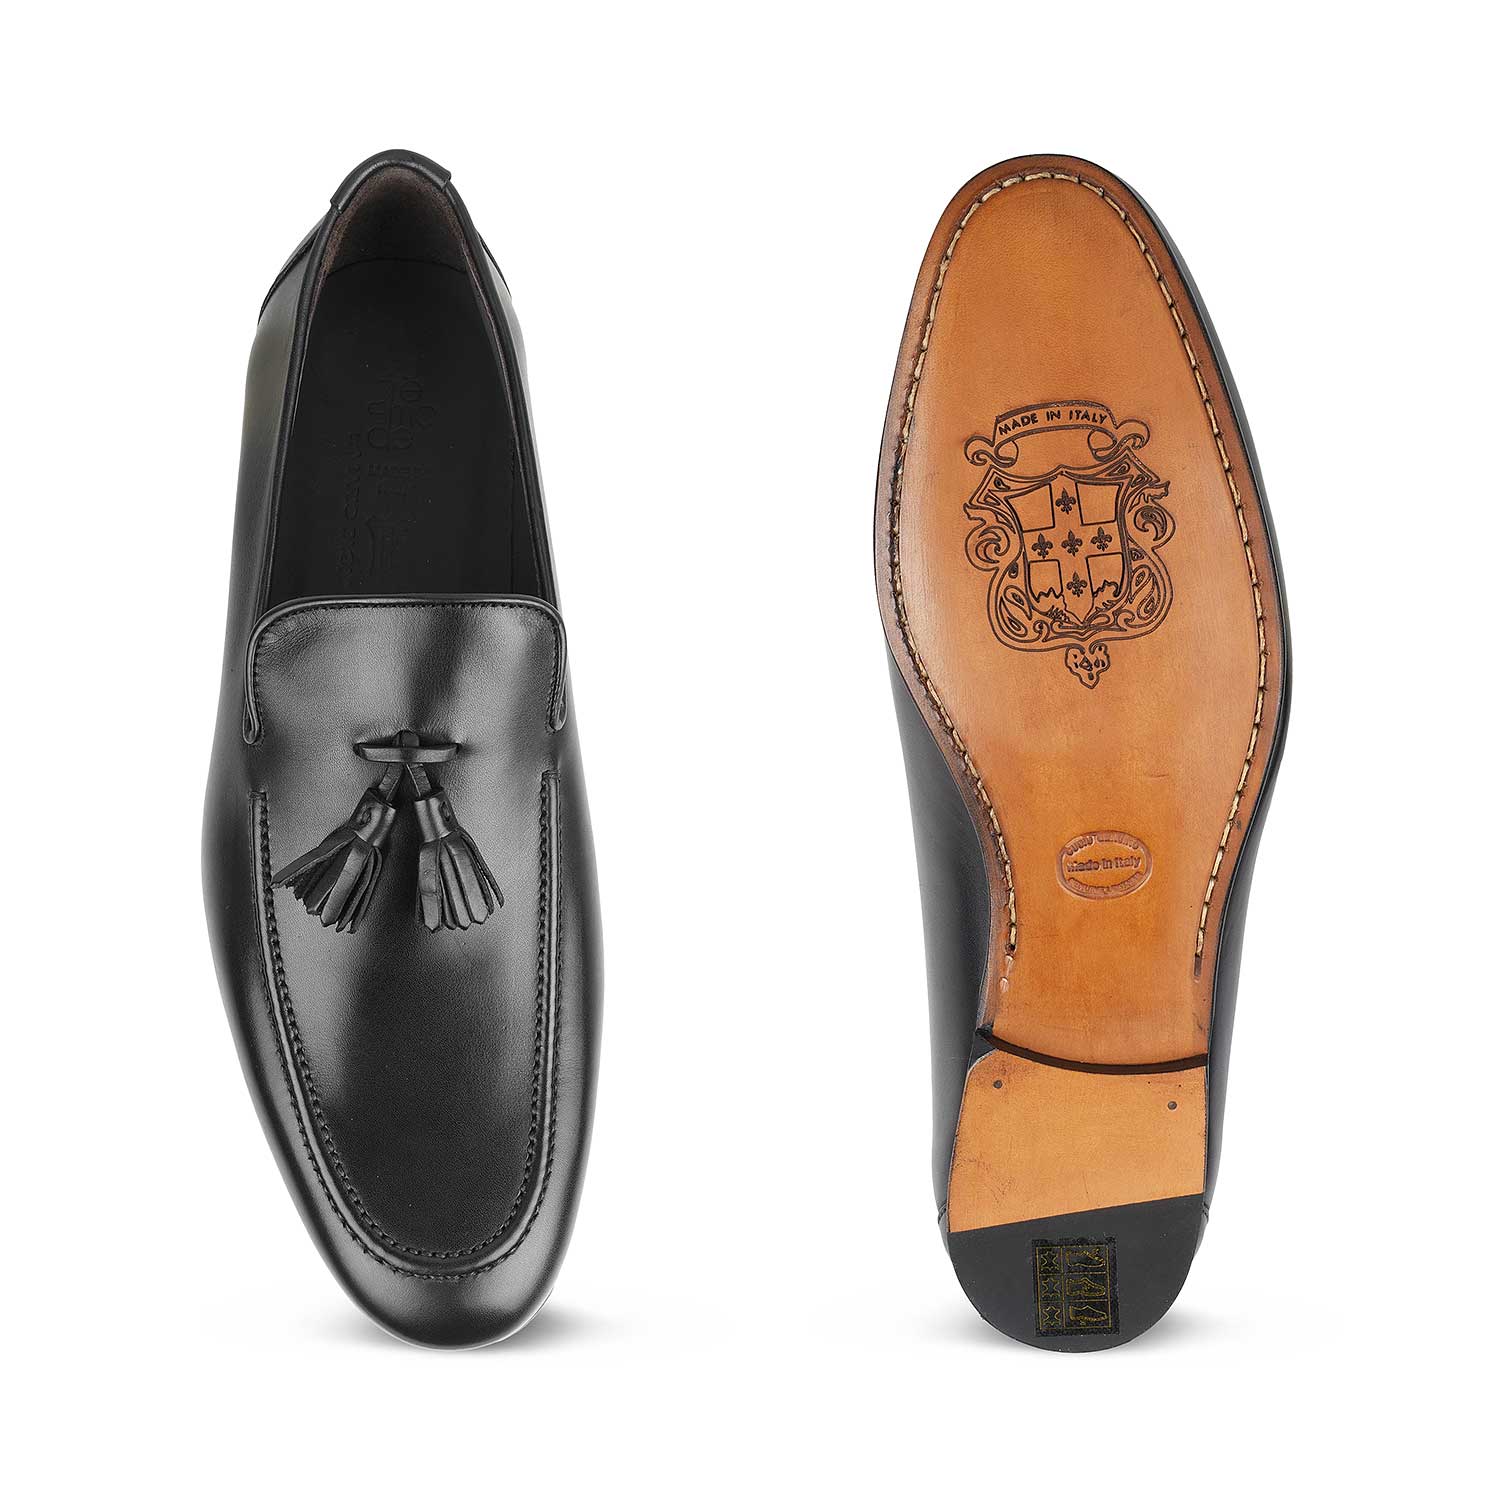 The Mancio Black Men's Handcrafted Leather Loafers Tresmode